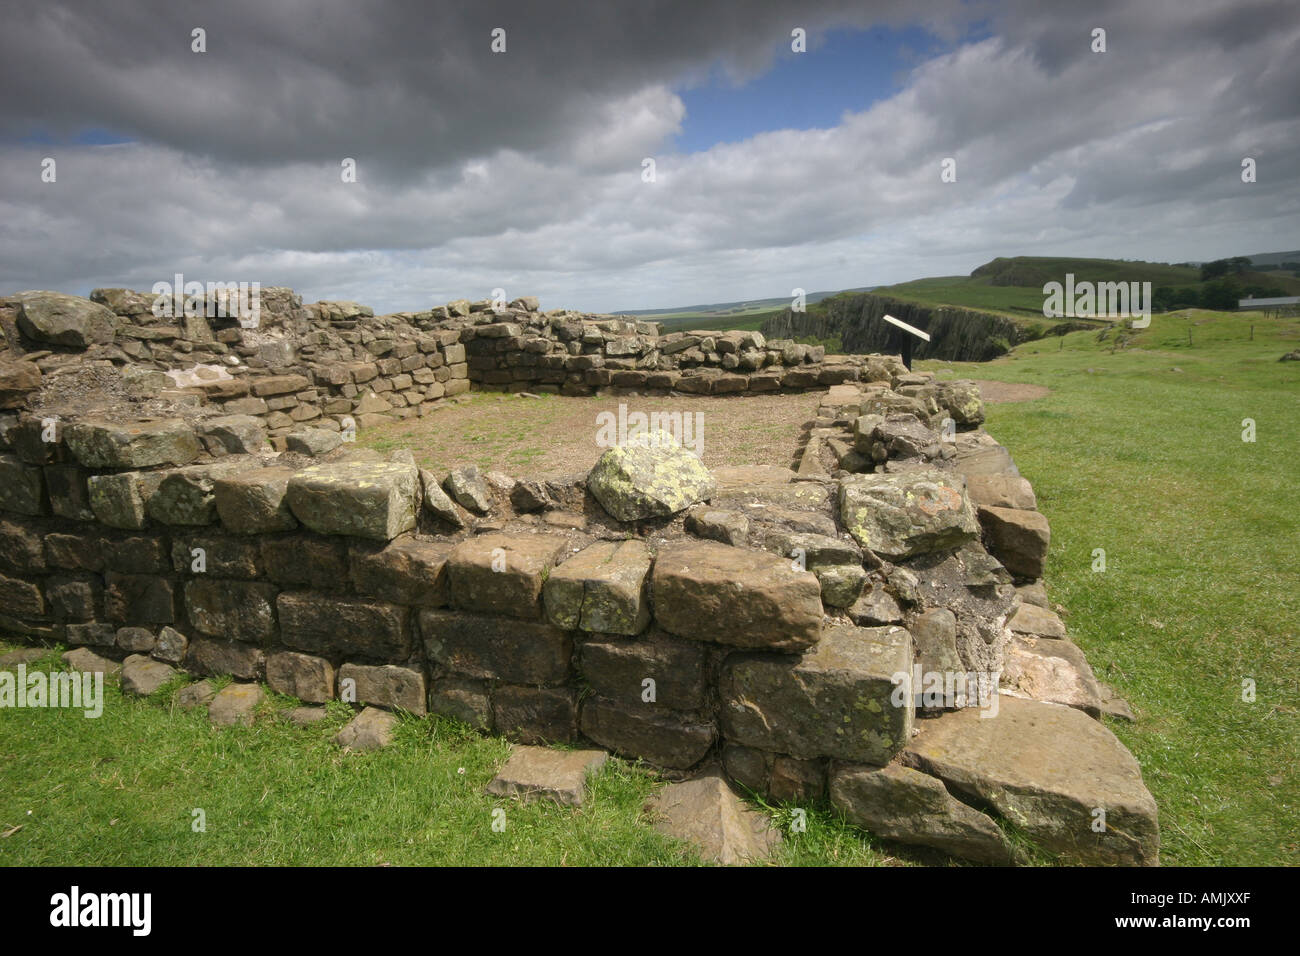 A Stock Photograph of a Milecastle on Hadrian s Wall in Northumbria UK Stock Photo